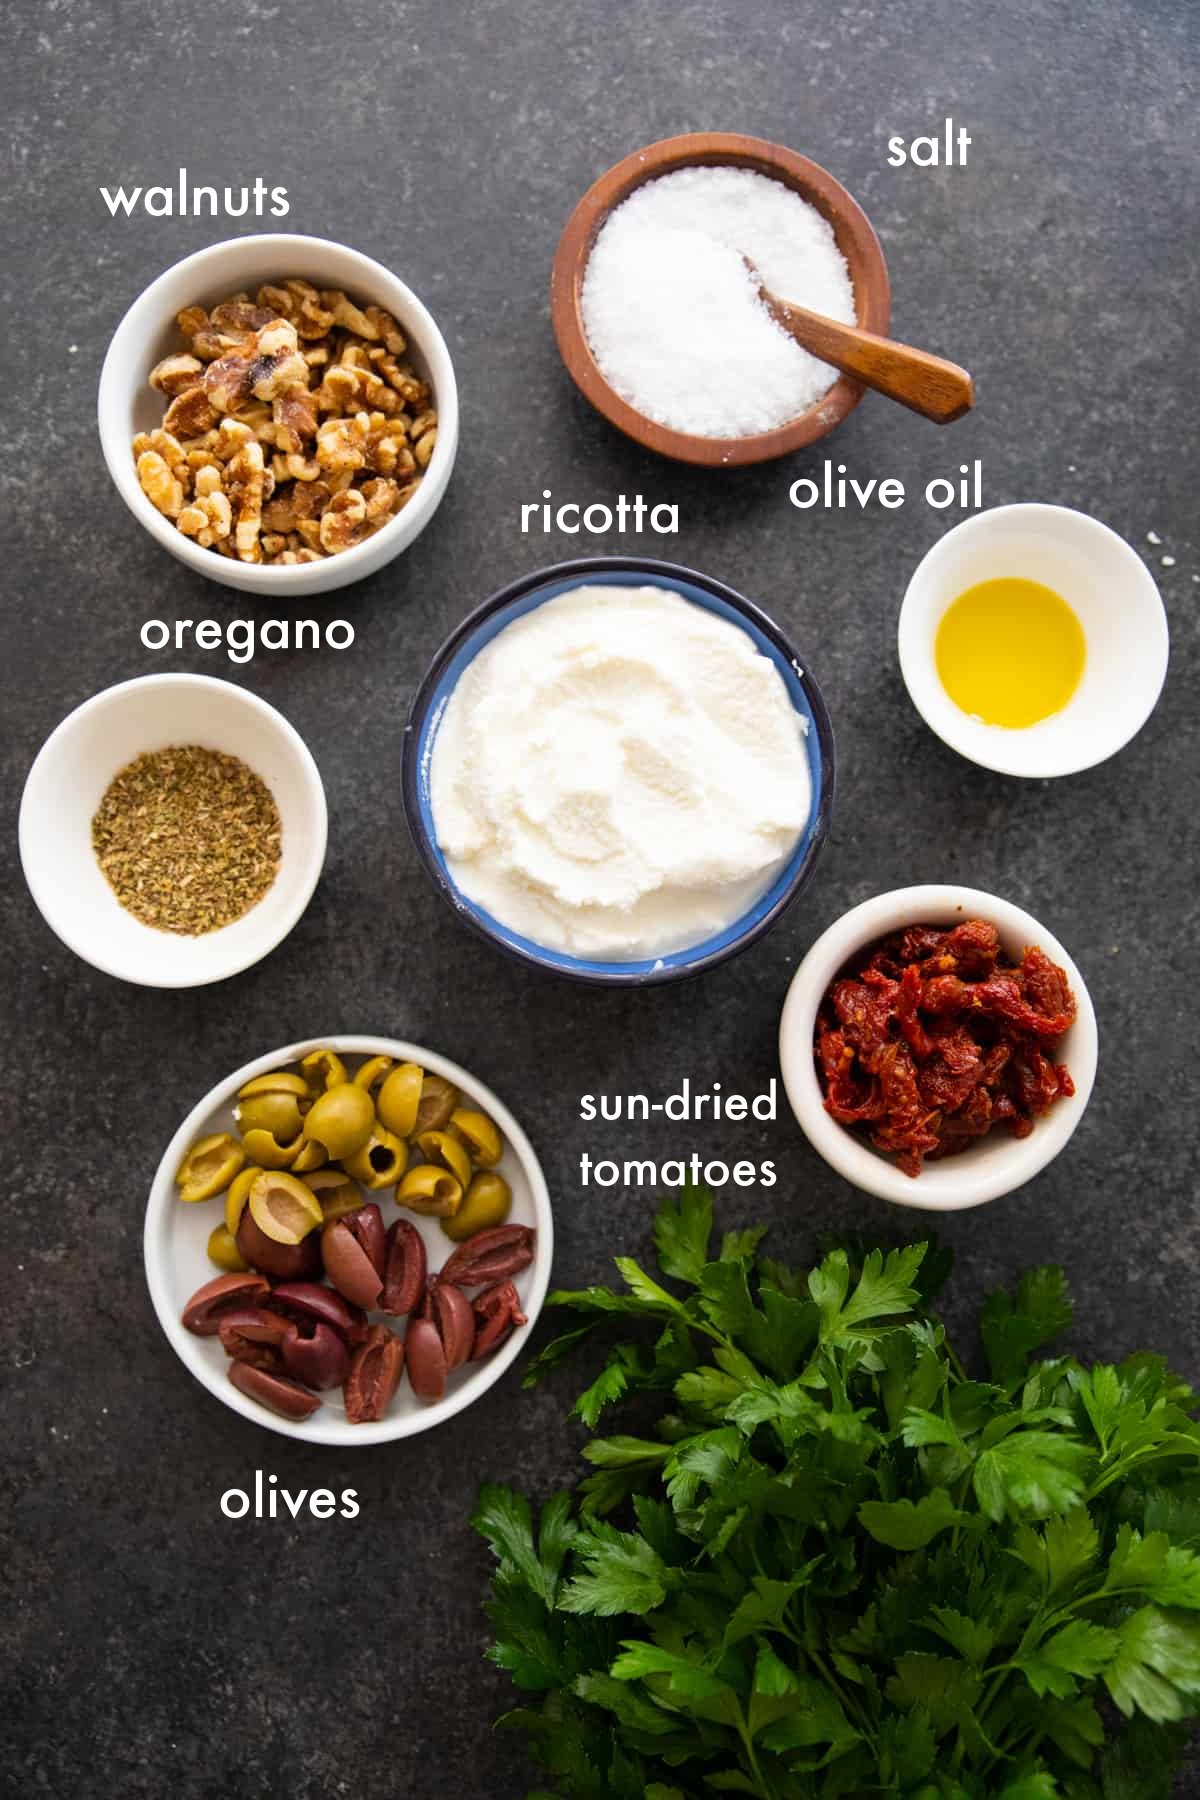 You need ricotta, olive oil, spices, olives, walnuts and sun dried tomatoes to make whipped ricotta. 